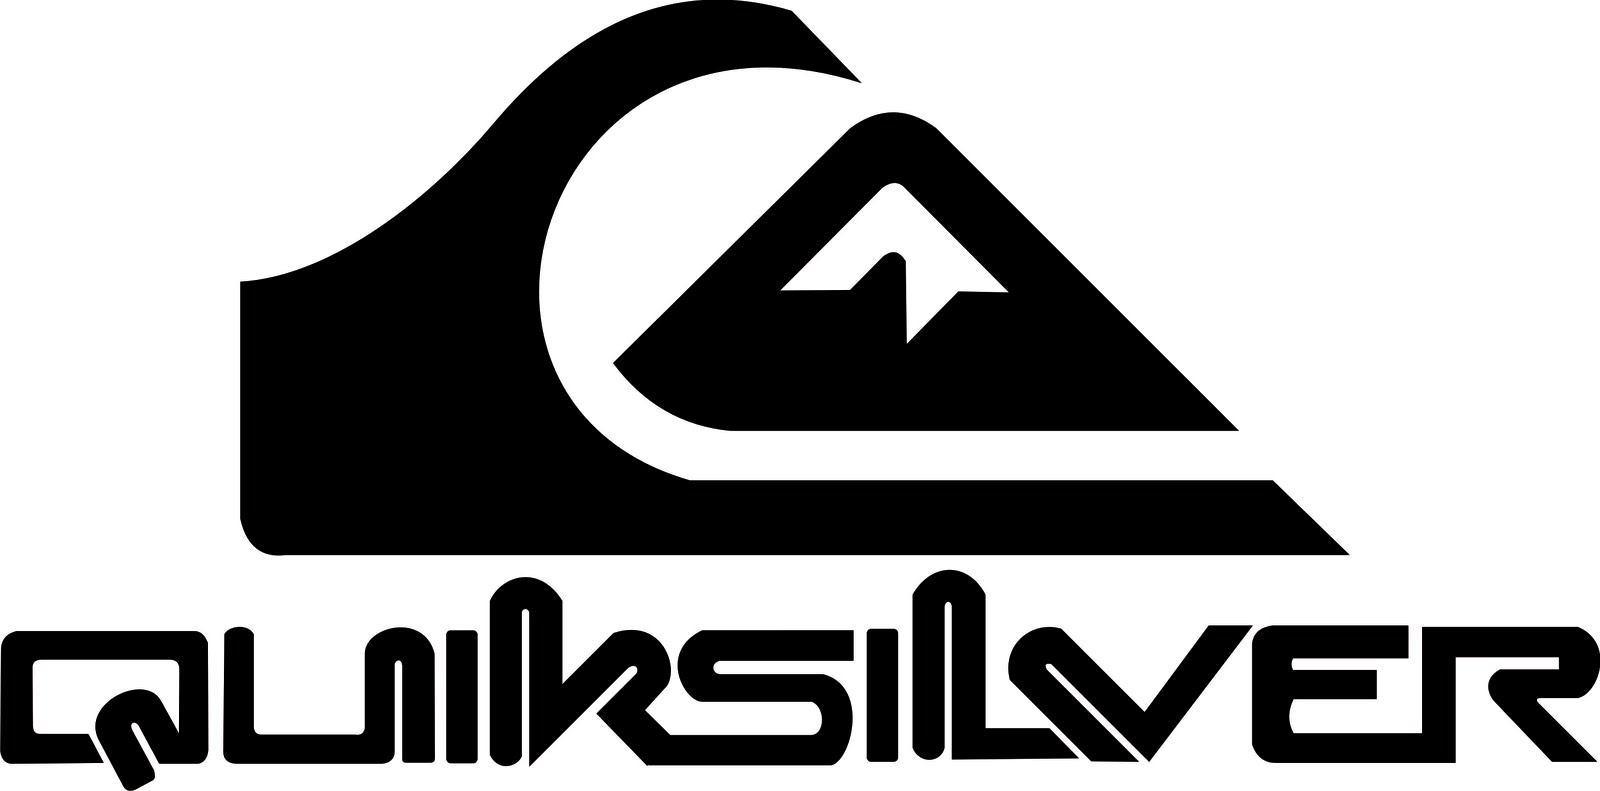 Quiksilver Logo - Quiksilver will be delisted after relaunch | RetailDetail